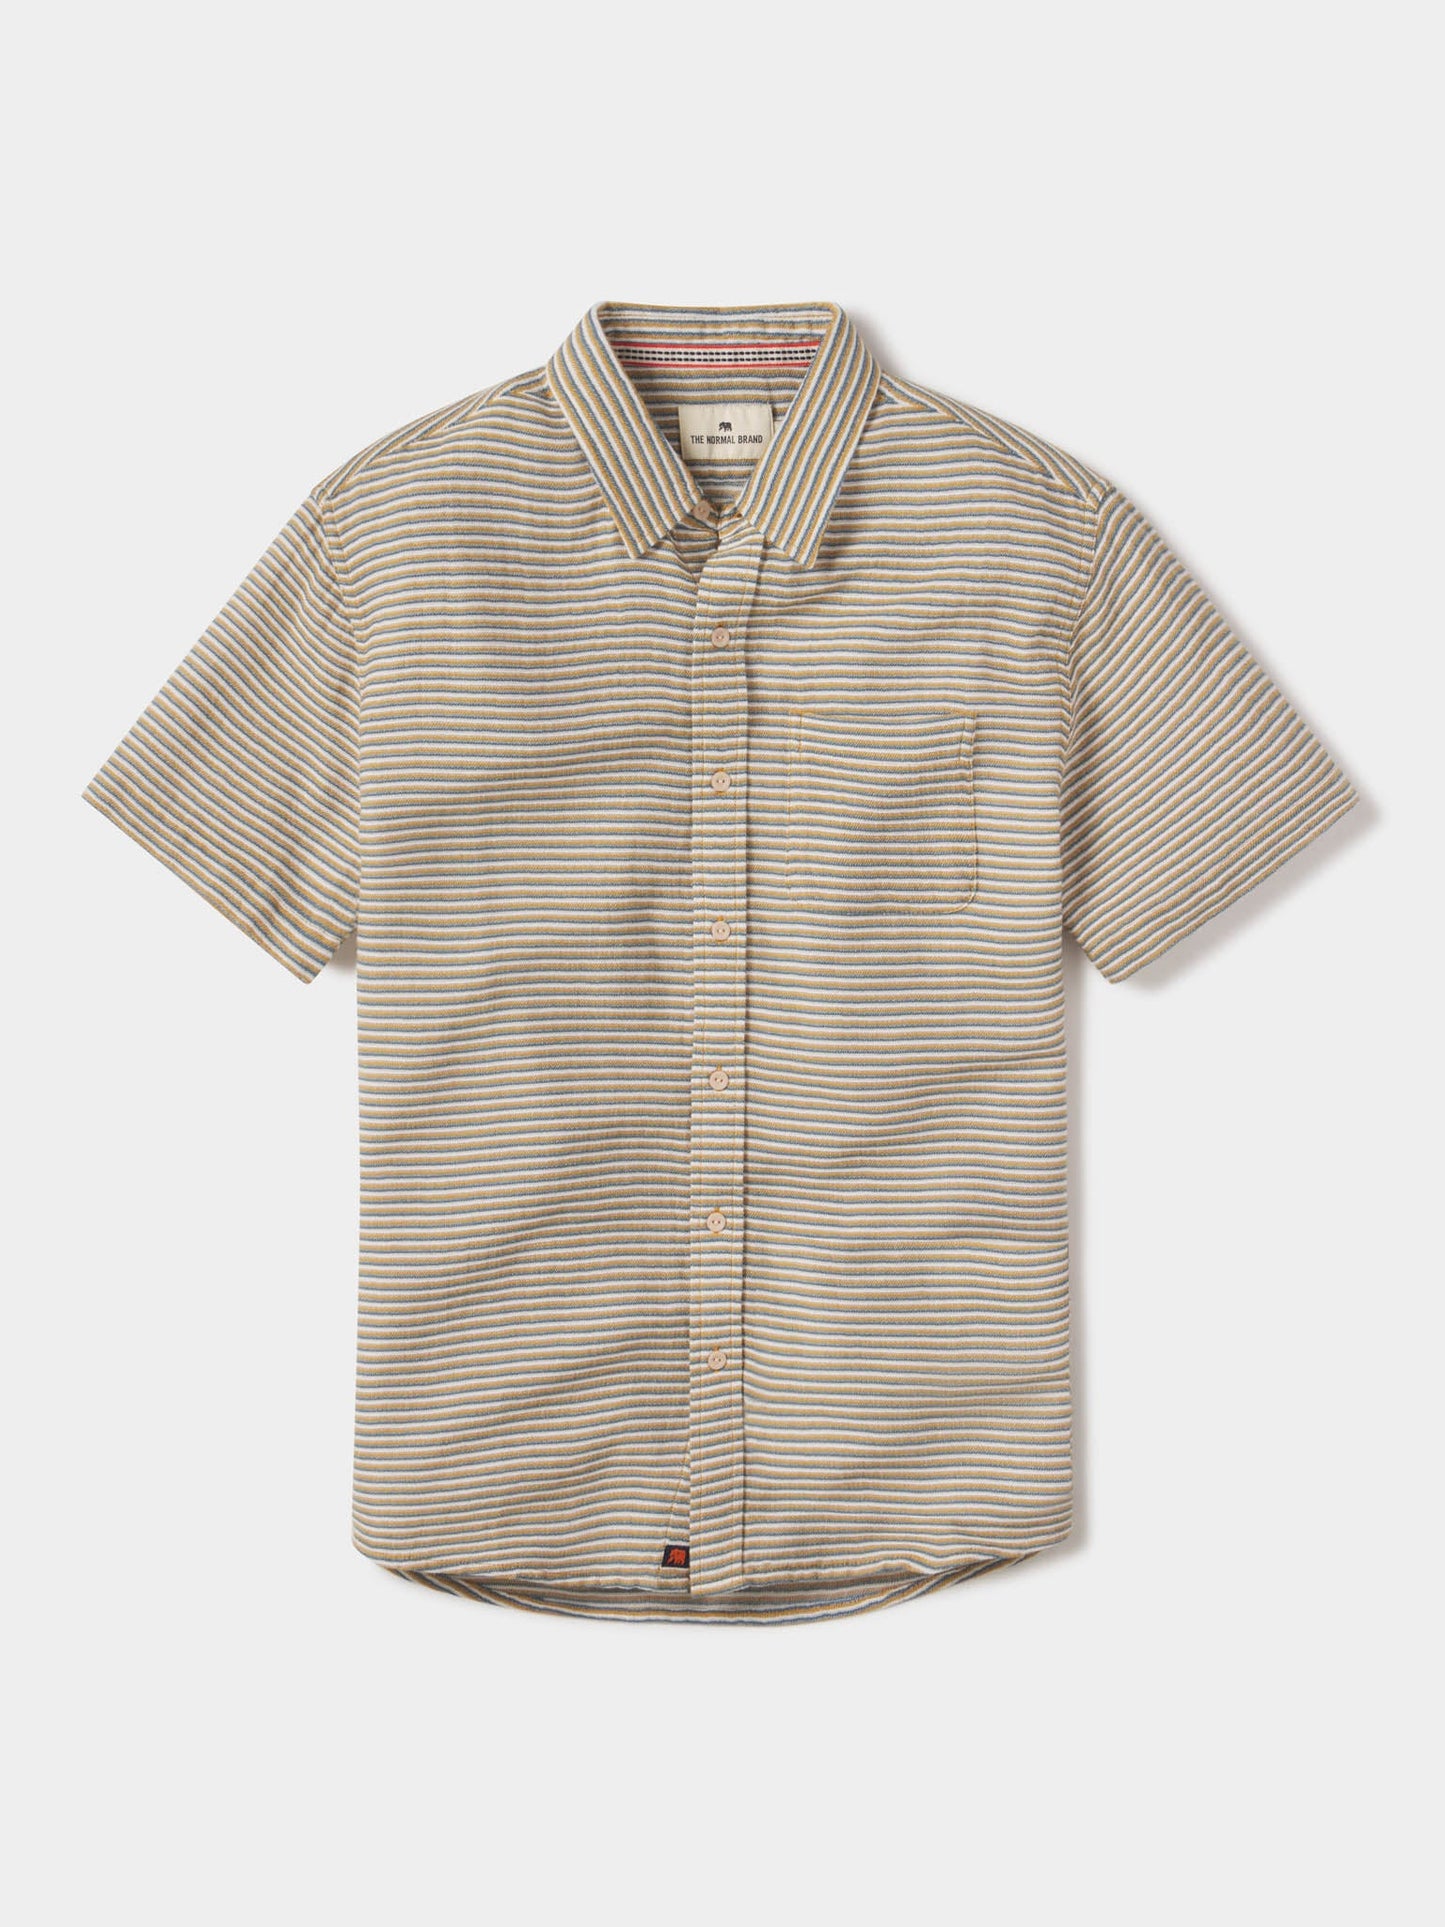 Freshwater Button Up Shirt - Tricolor Gold Stripe